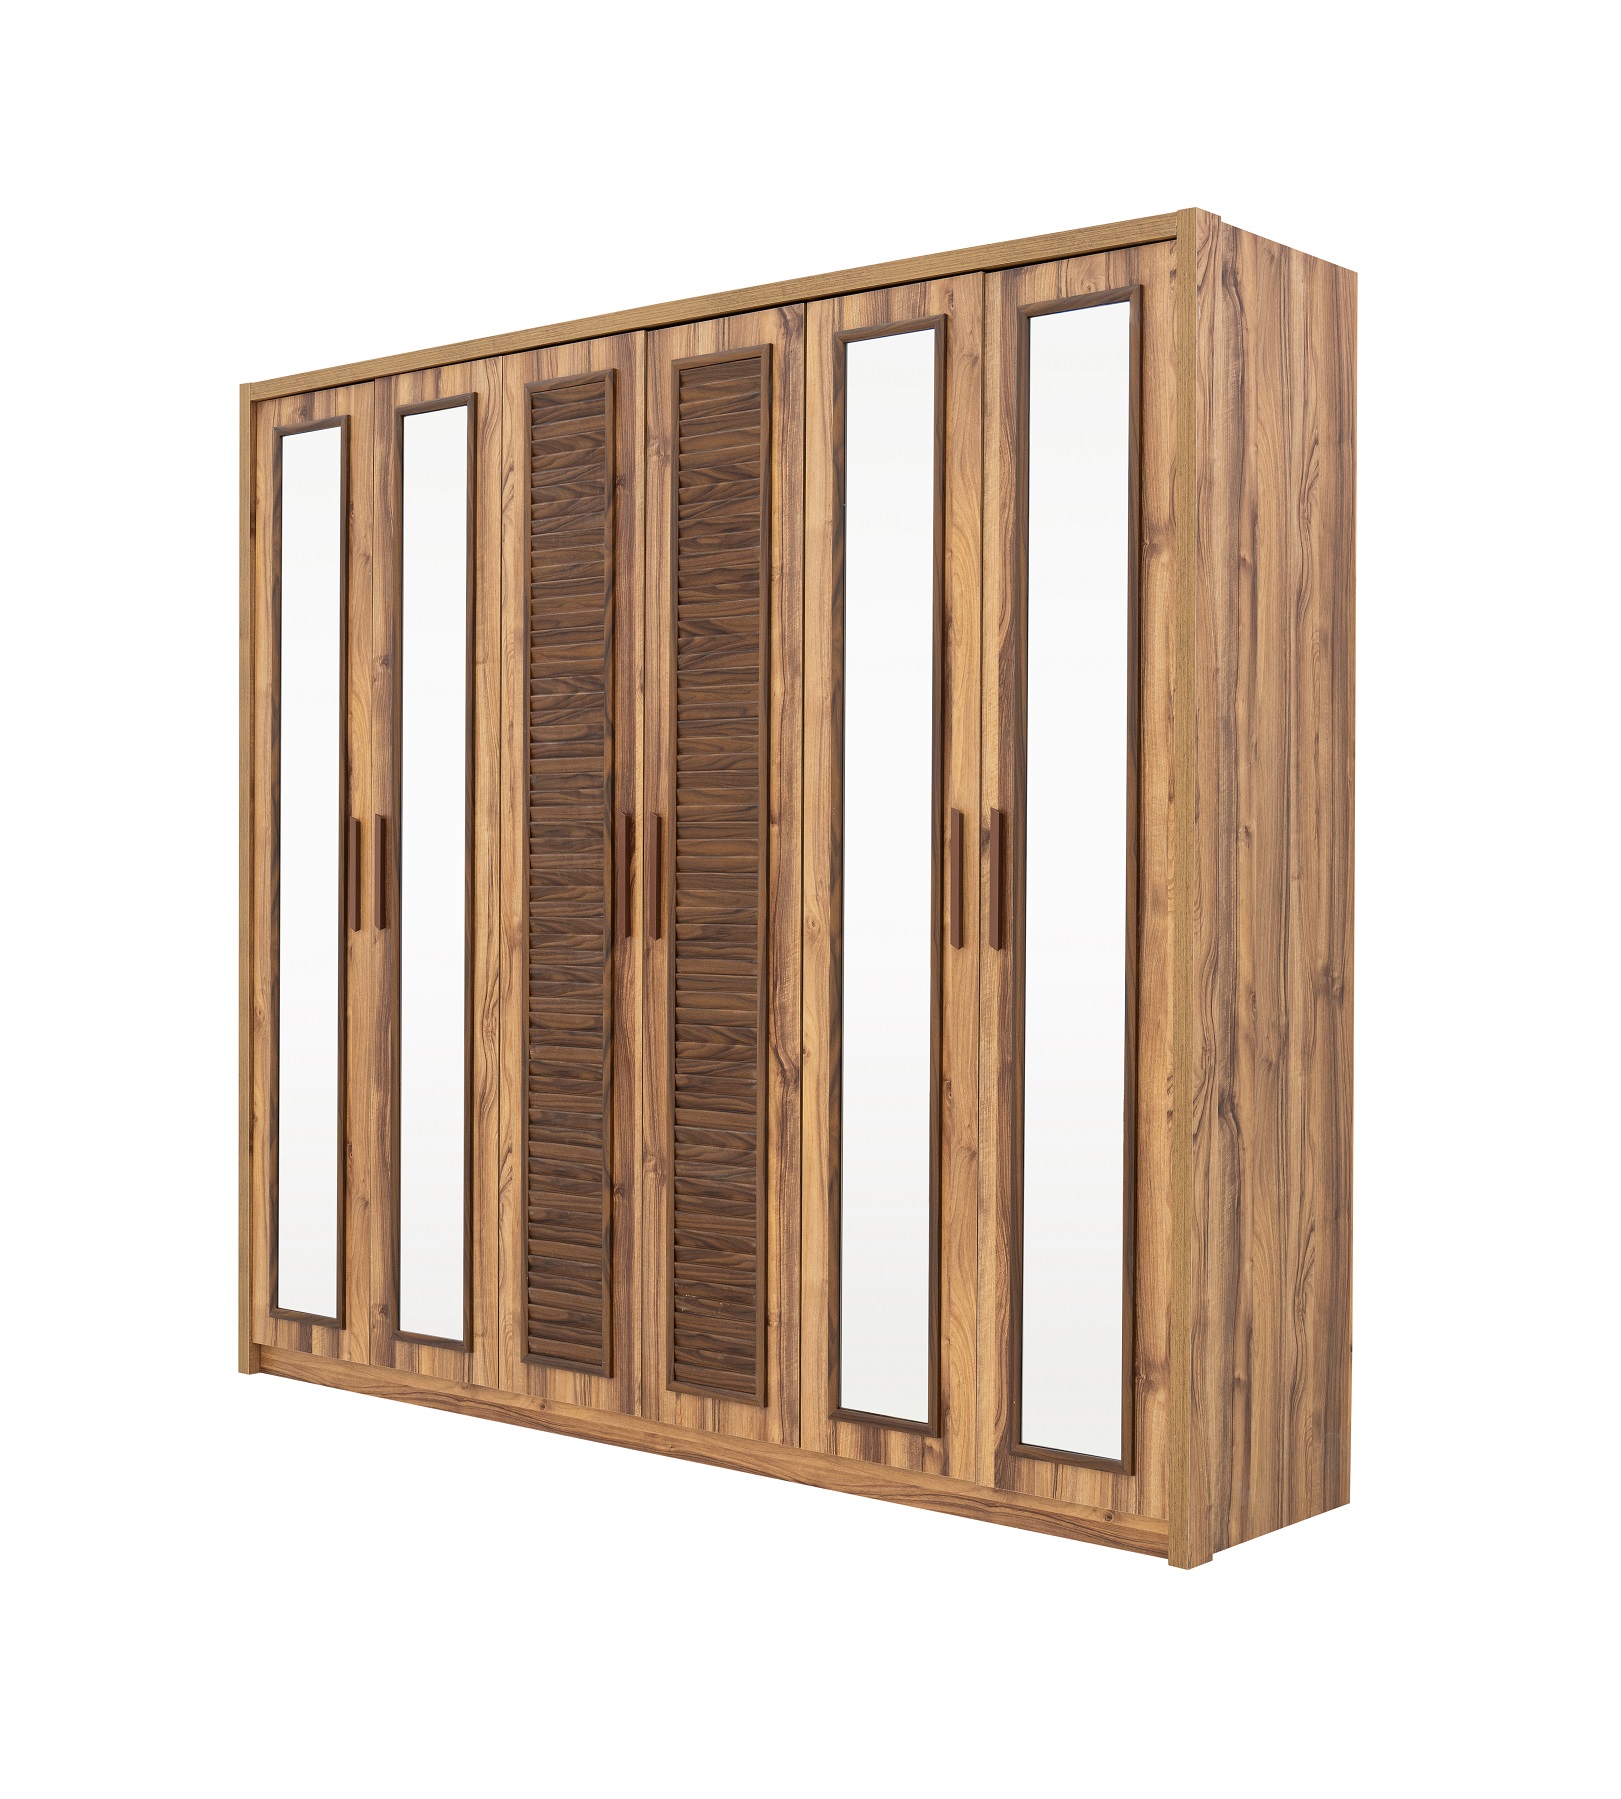 LOUVER DBR 6DR WITH BENCH BROWN (31)